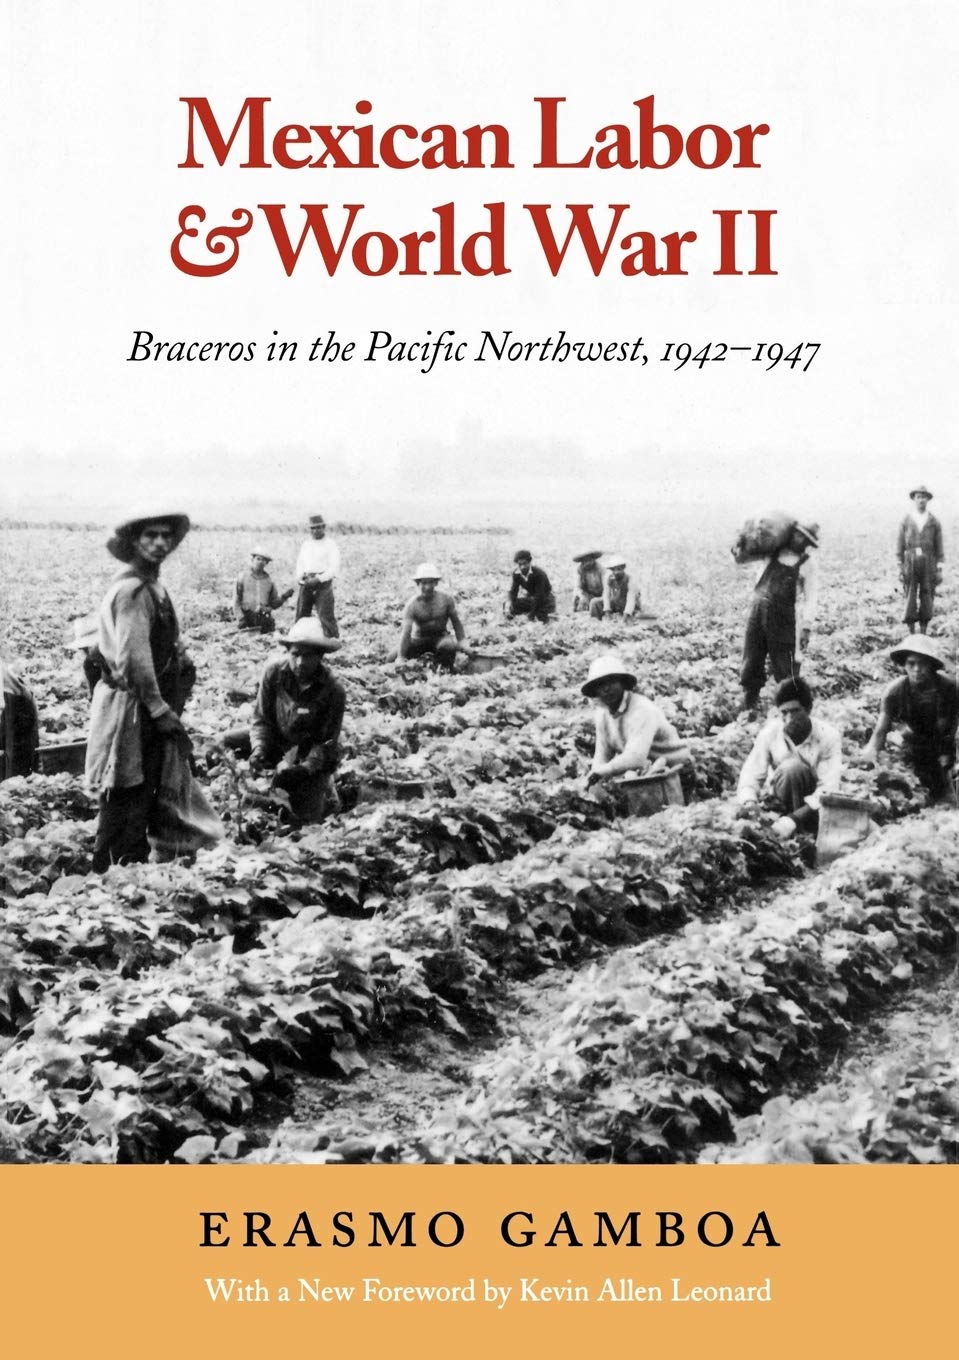 Mexican labor and World War II: Braceros in the Pacific Northwest, 1942-1947 (book cover)